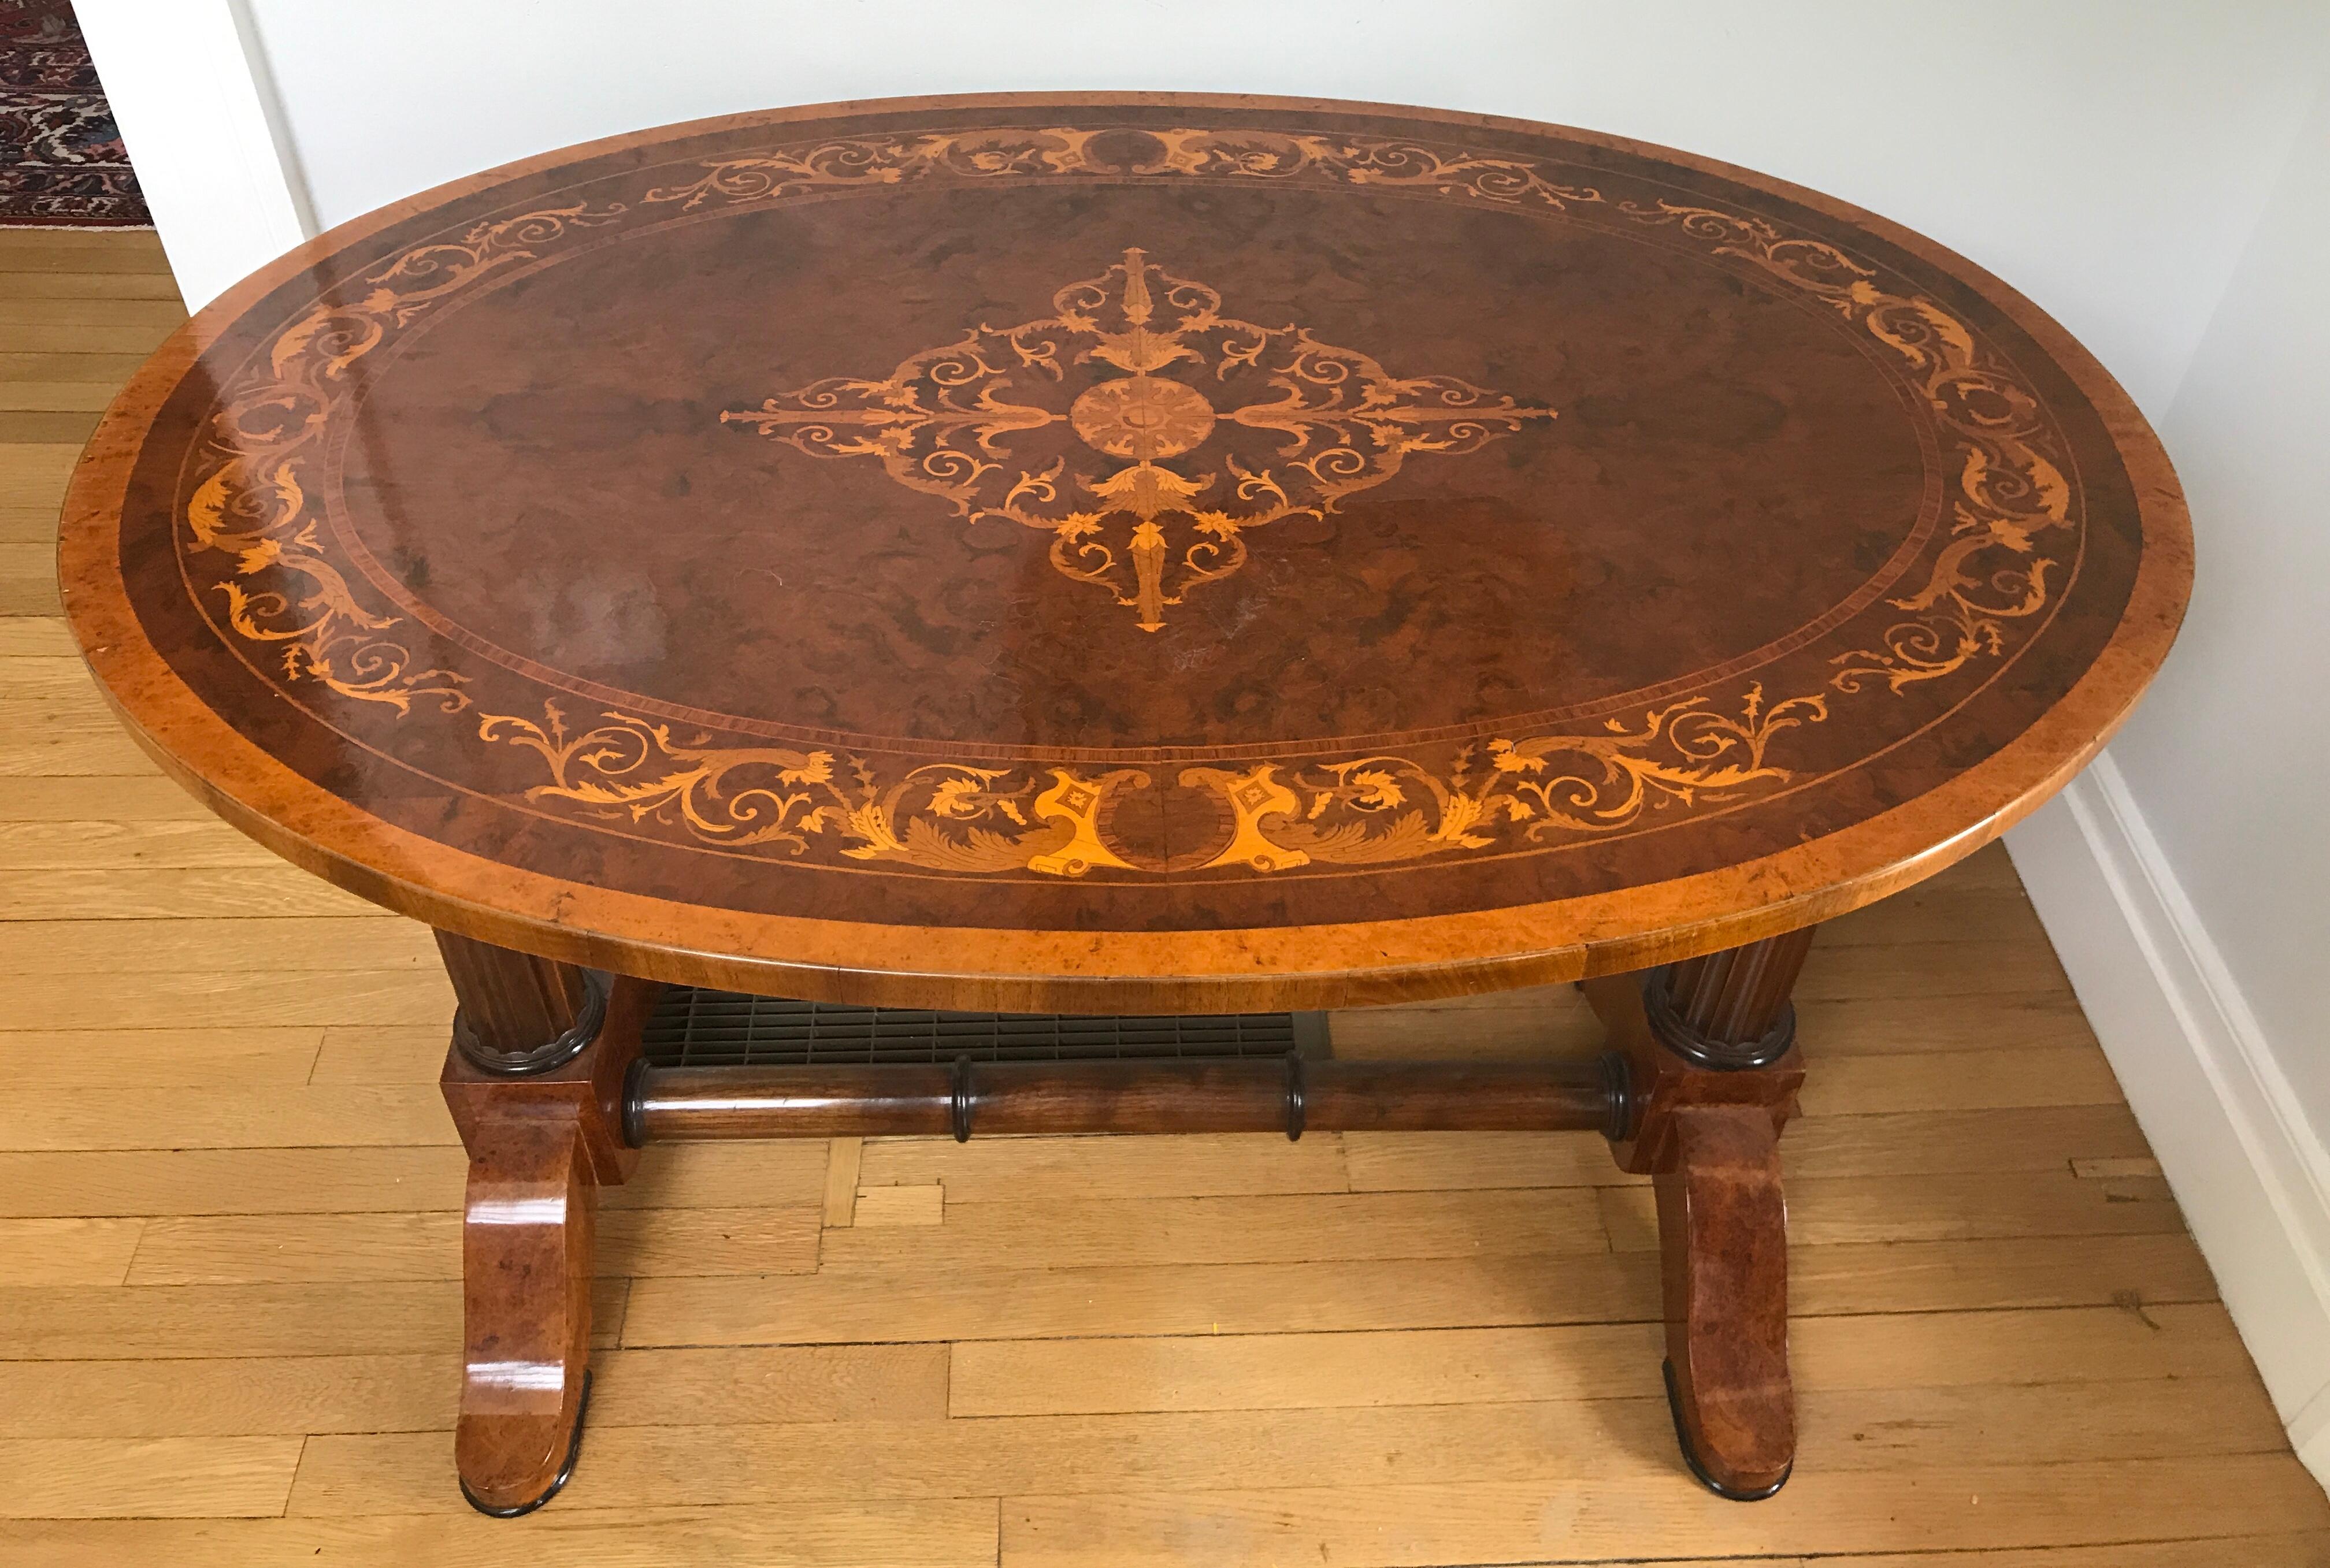 Unique oval 19th century Biedermeier writing table, Hungary circa 1820-1830, bird's-eye maple veneer, burl walnut and elmwood veneer with akanthus leave marquetry on the top. The table has one drawer. Great design with beautiful details. The table